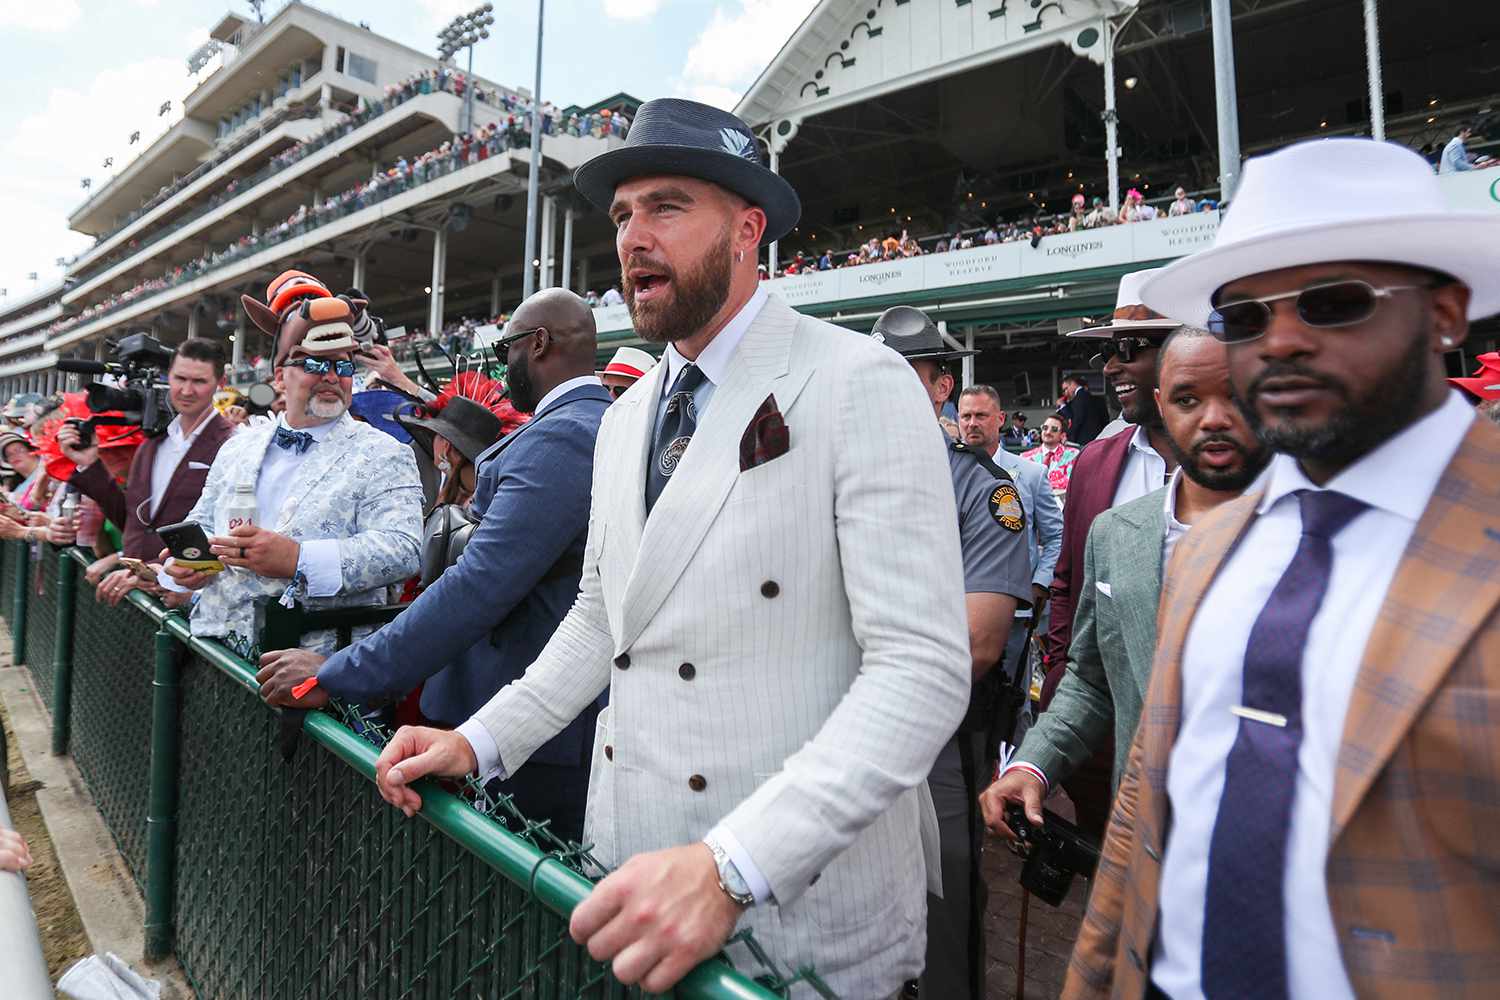 Kansa City Chiefs player Travis Kelce enjoys a race at the 150th running of the Kentucky Derby at Churchill Downs 